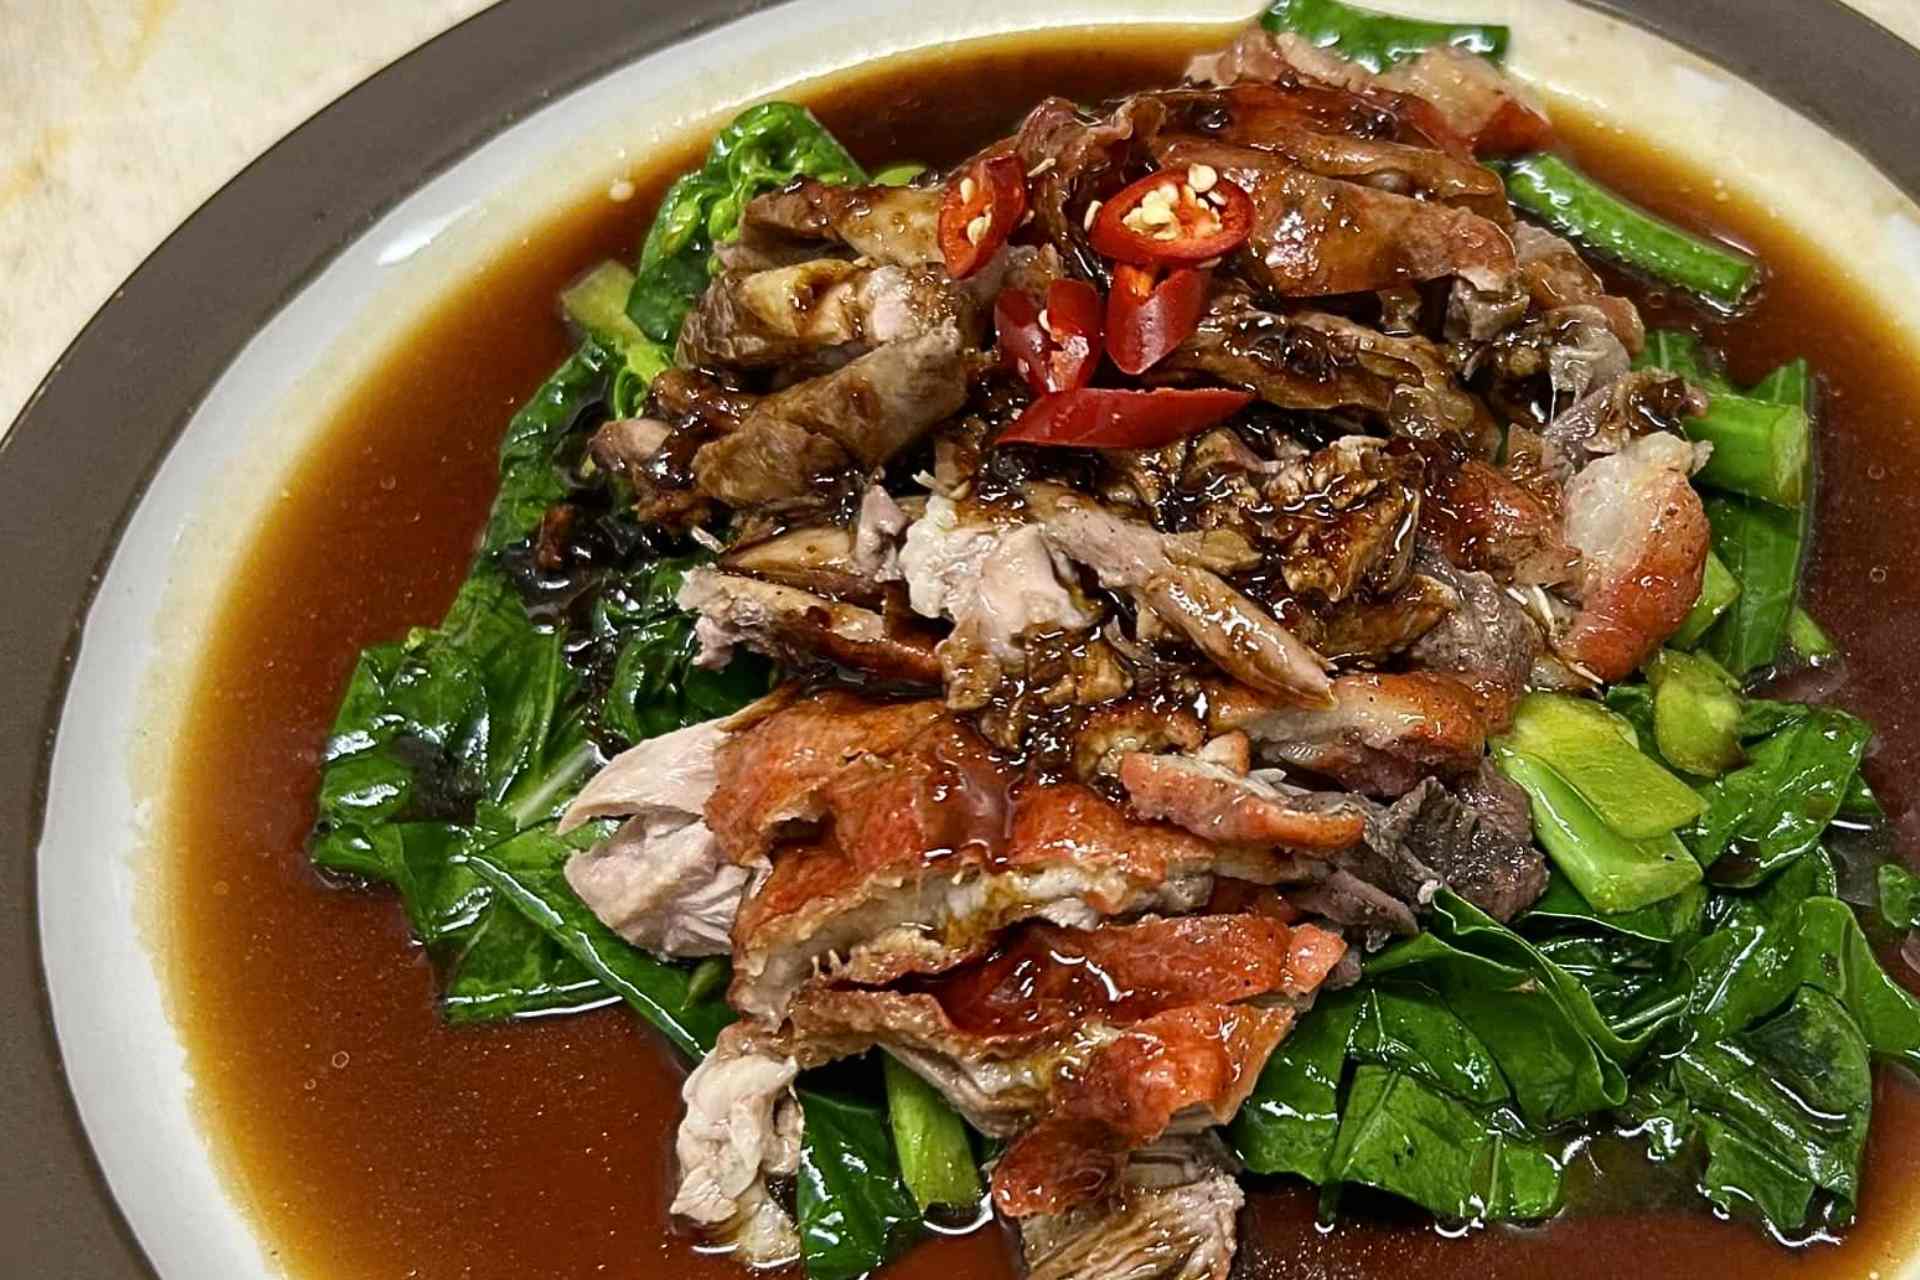 10 Best Restaurants for Cheap Eats in Canberra - Baitong Thai at Cooleman Court